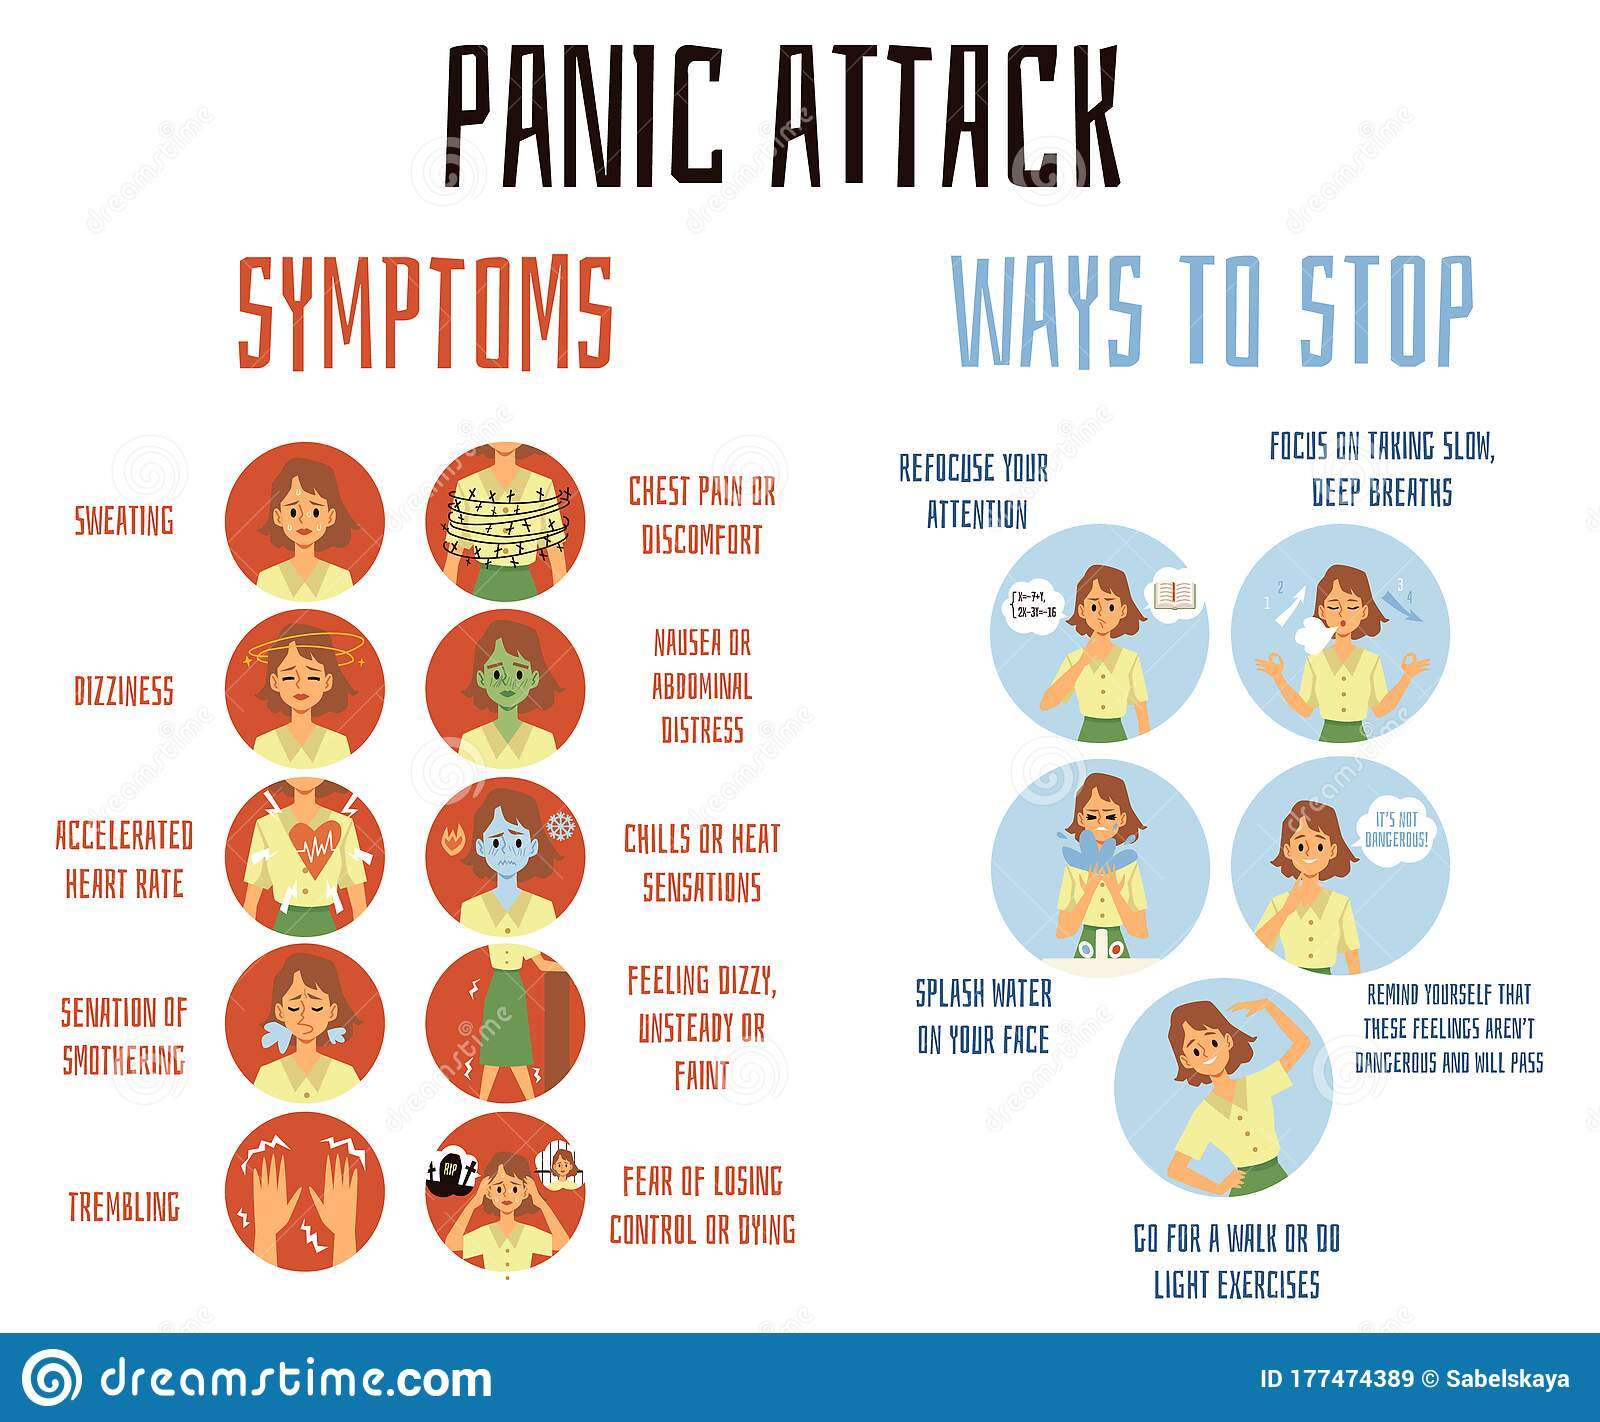 Panic Attack Symptoms And Ways To Stop